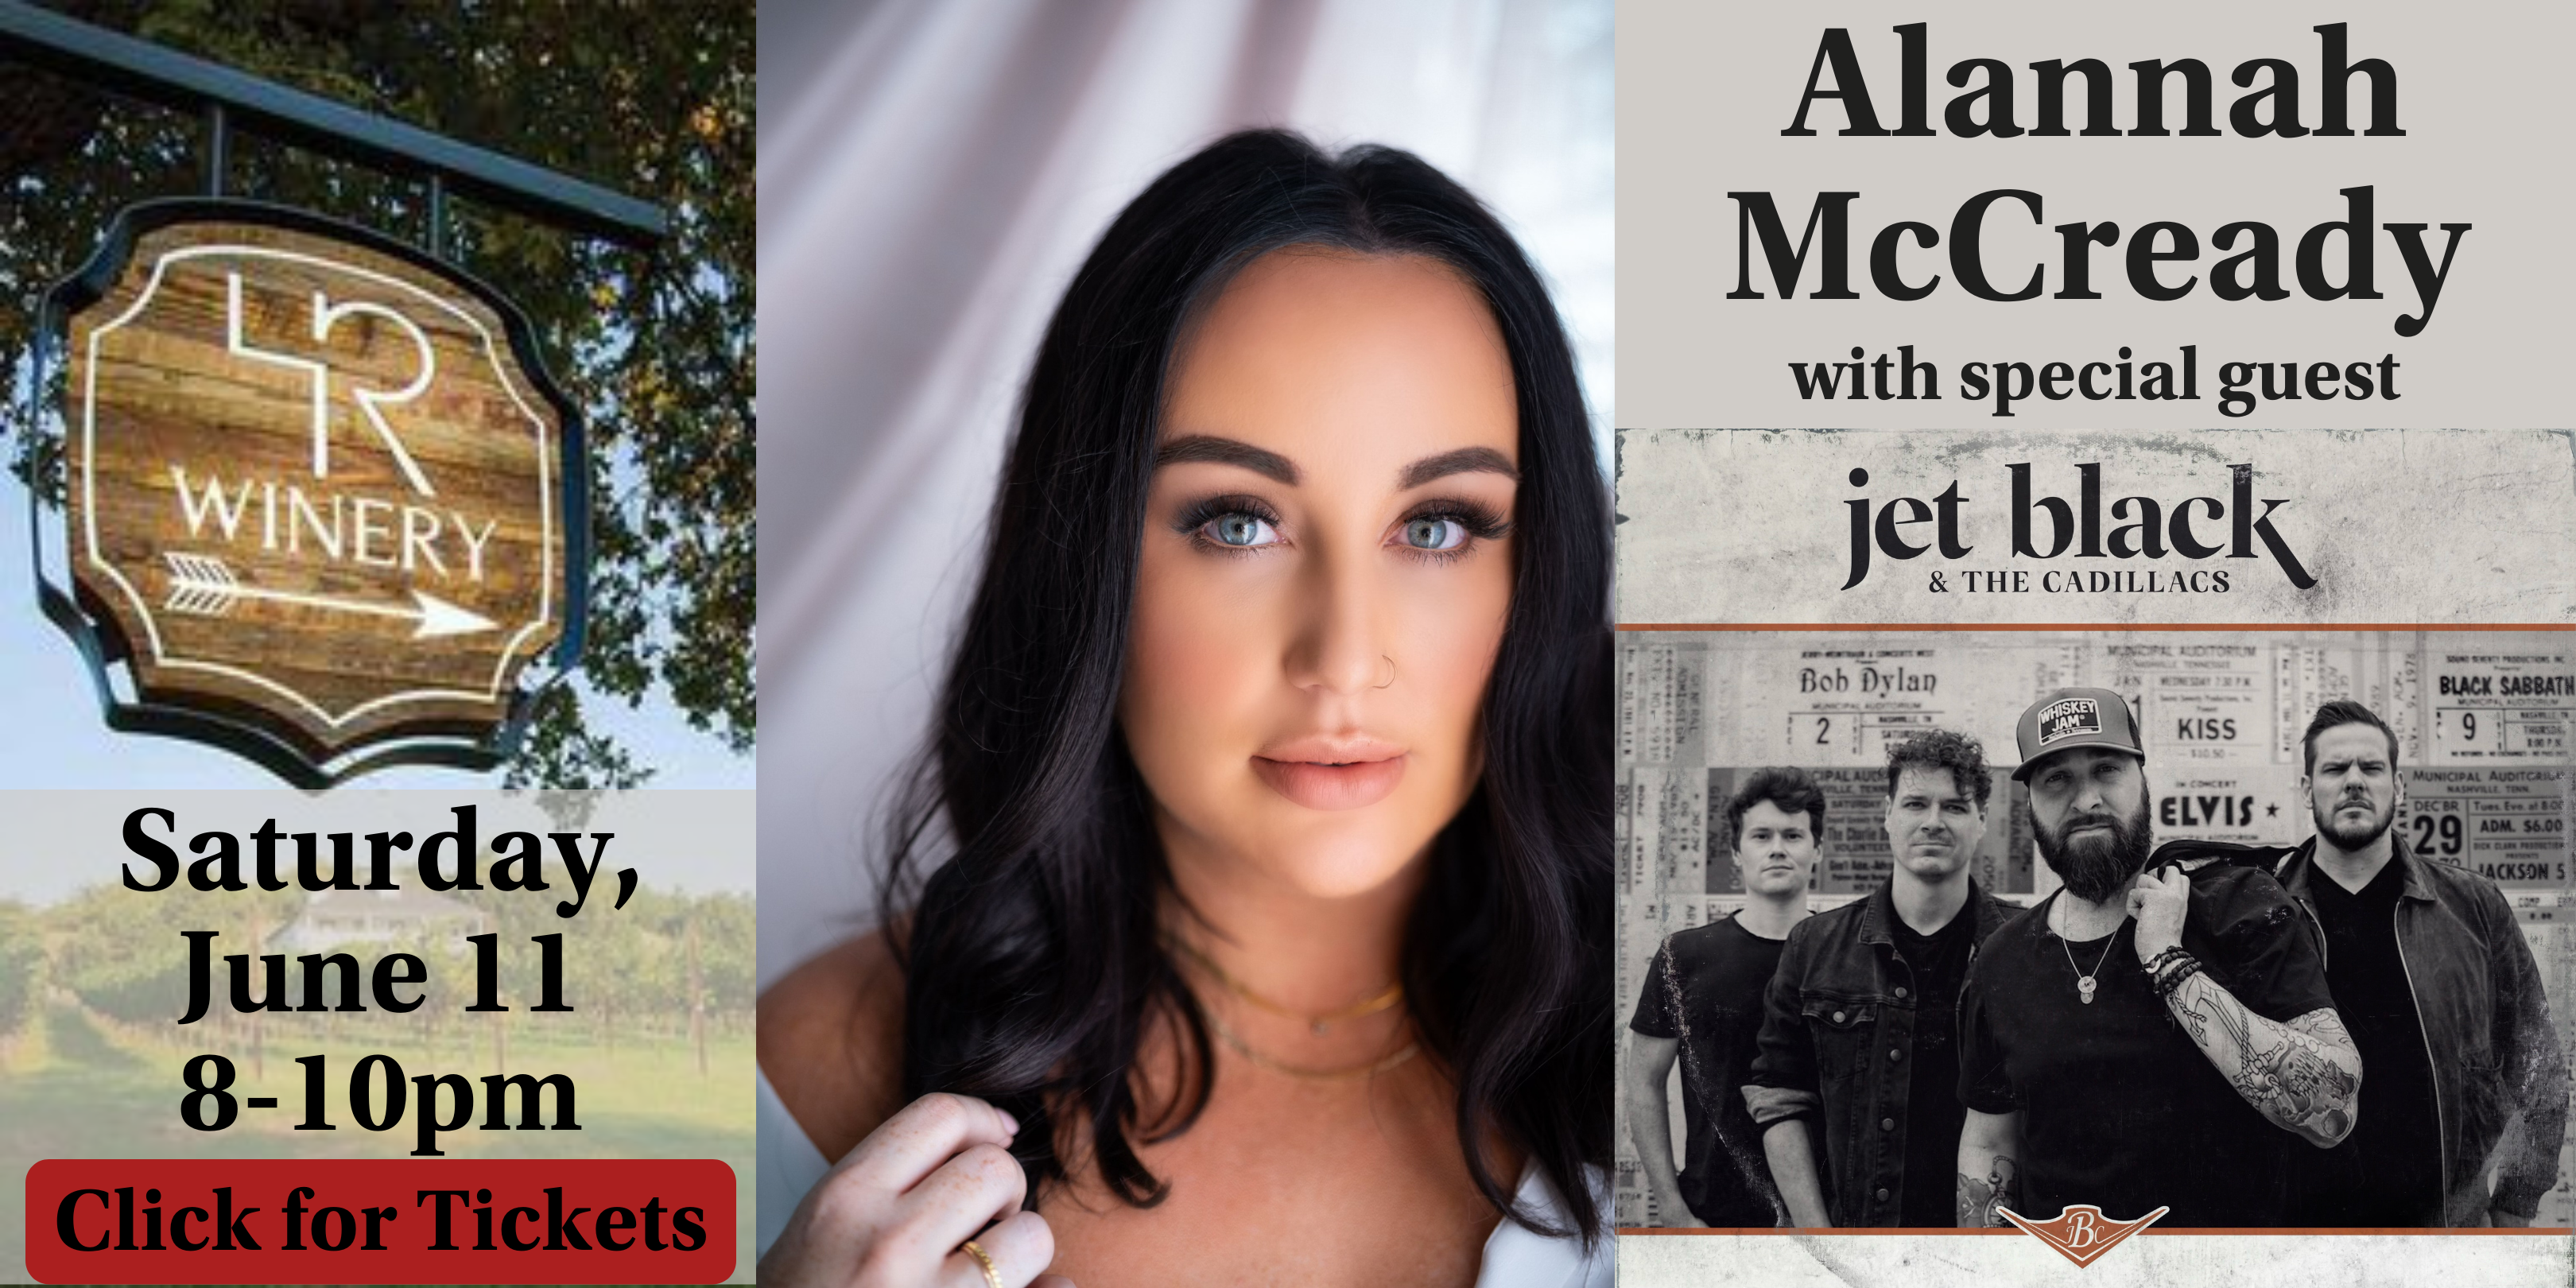 Alannah McCready with special guest Jet Black & the Cadillacs